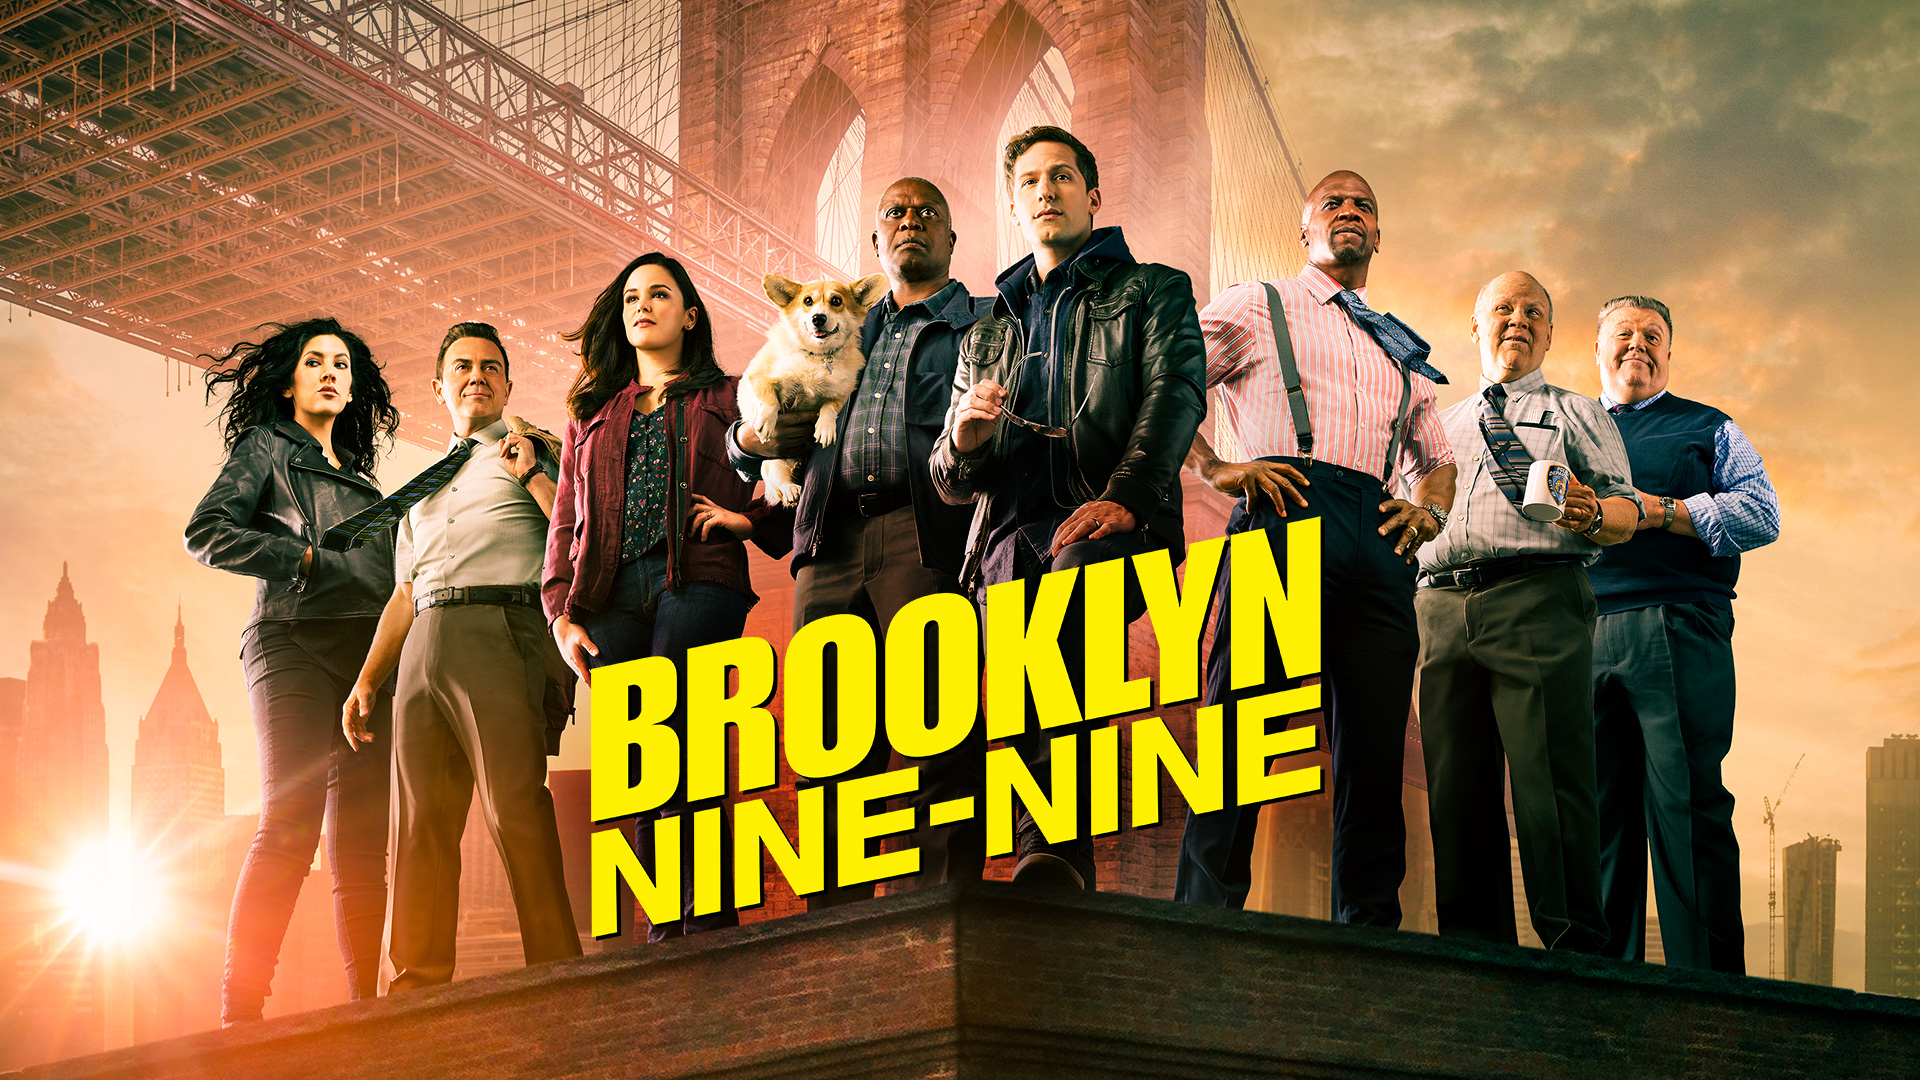 I made some b99 wallpapers Feel free to screenshot I also have them on  zedge for free  rbrooklynninenine